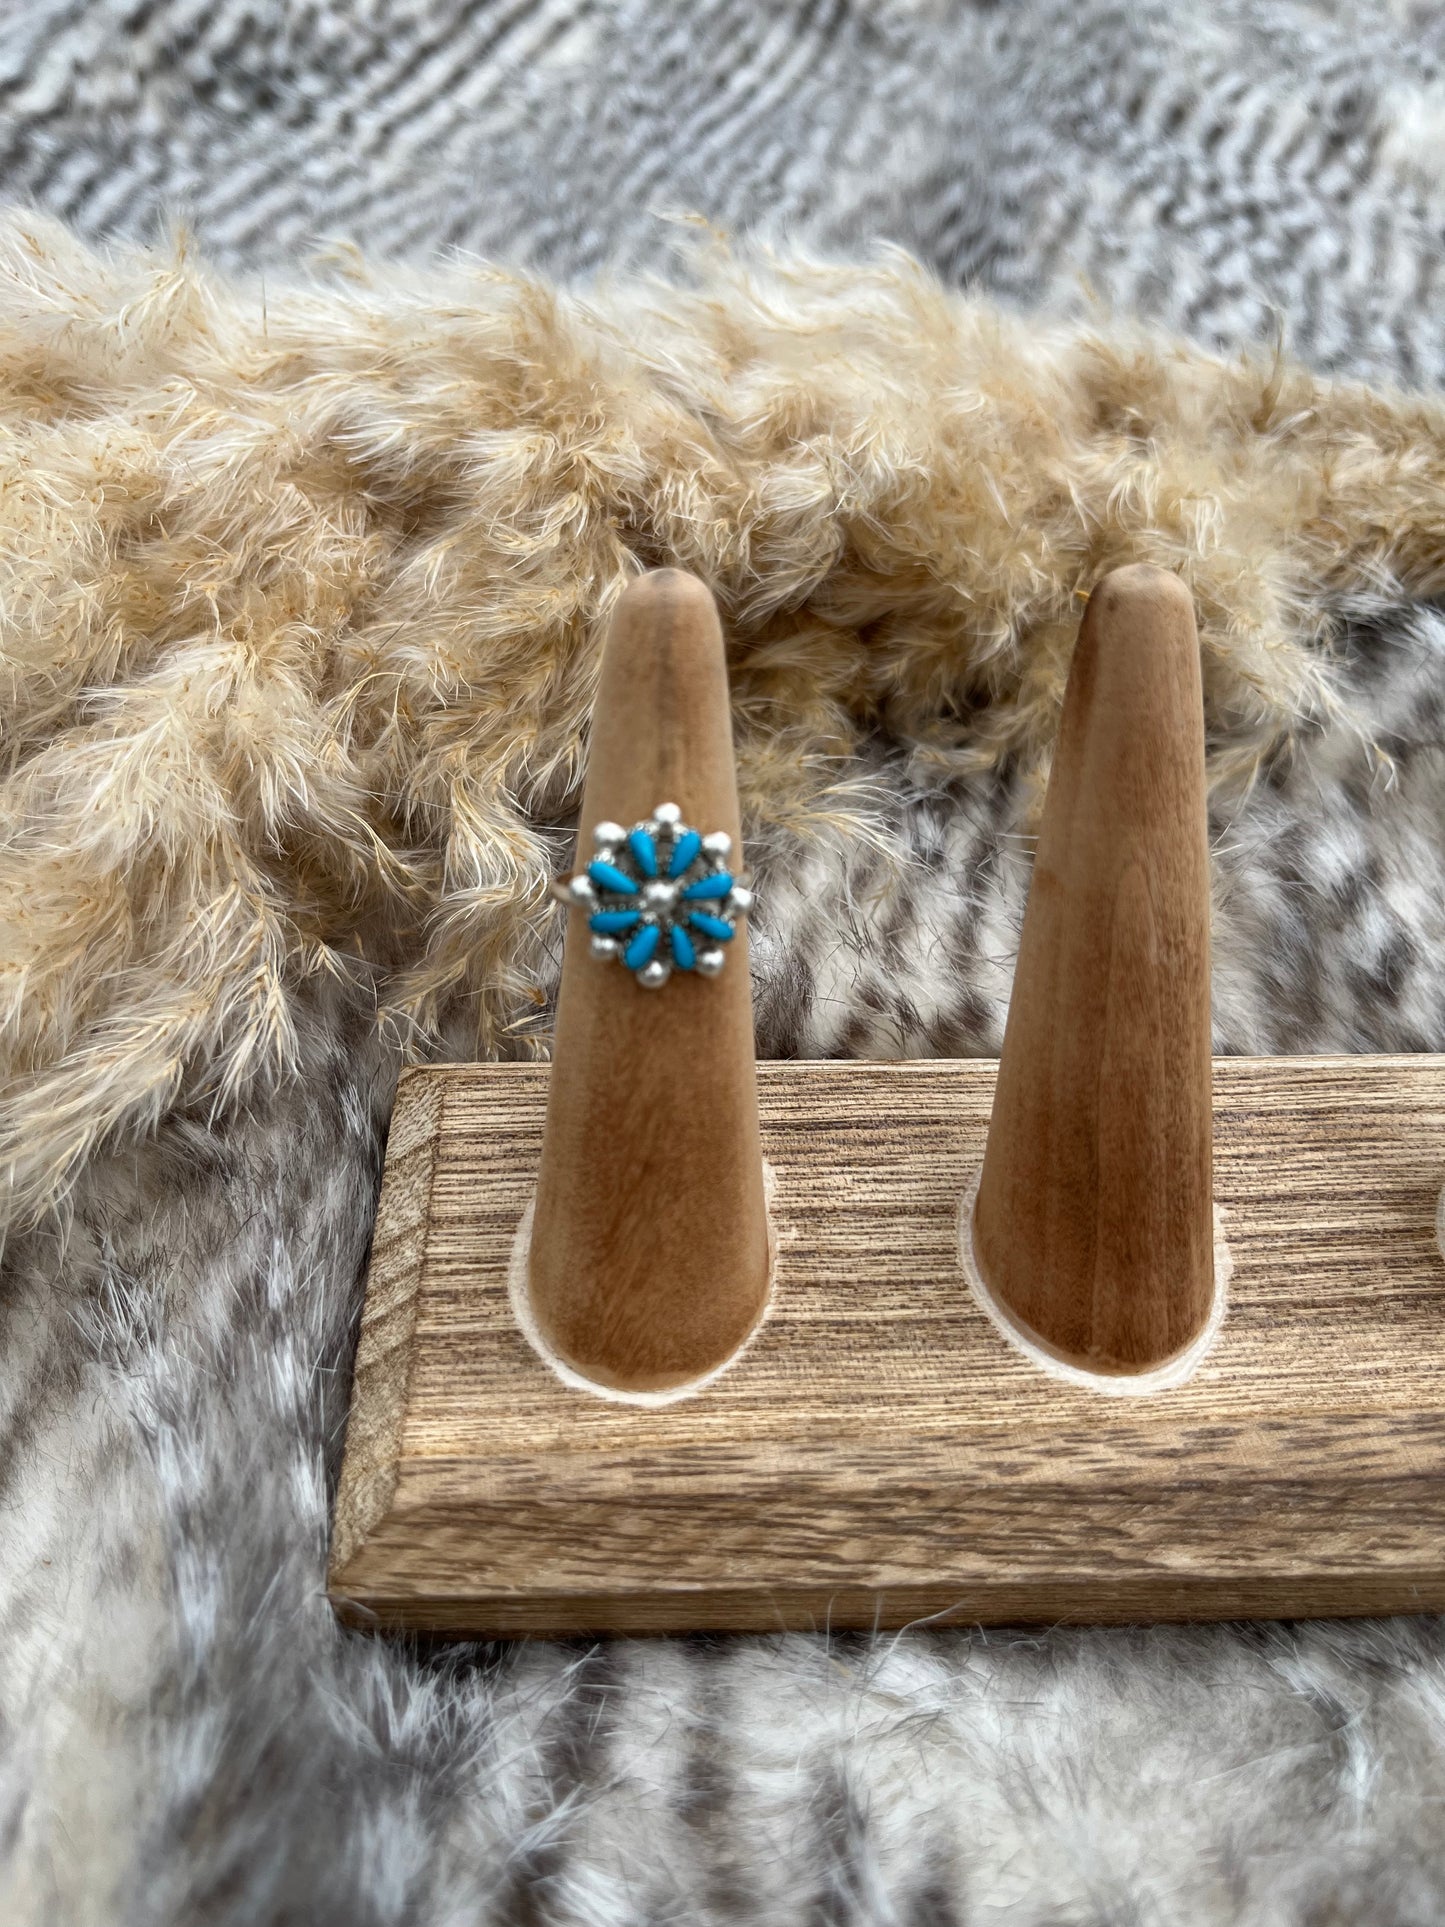 Small Zuni Cluster Ring